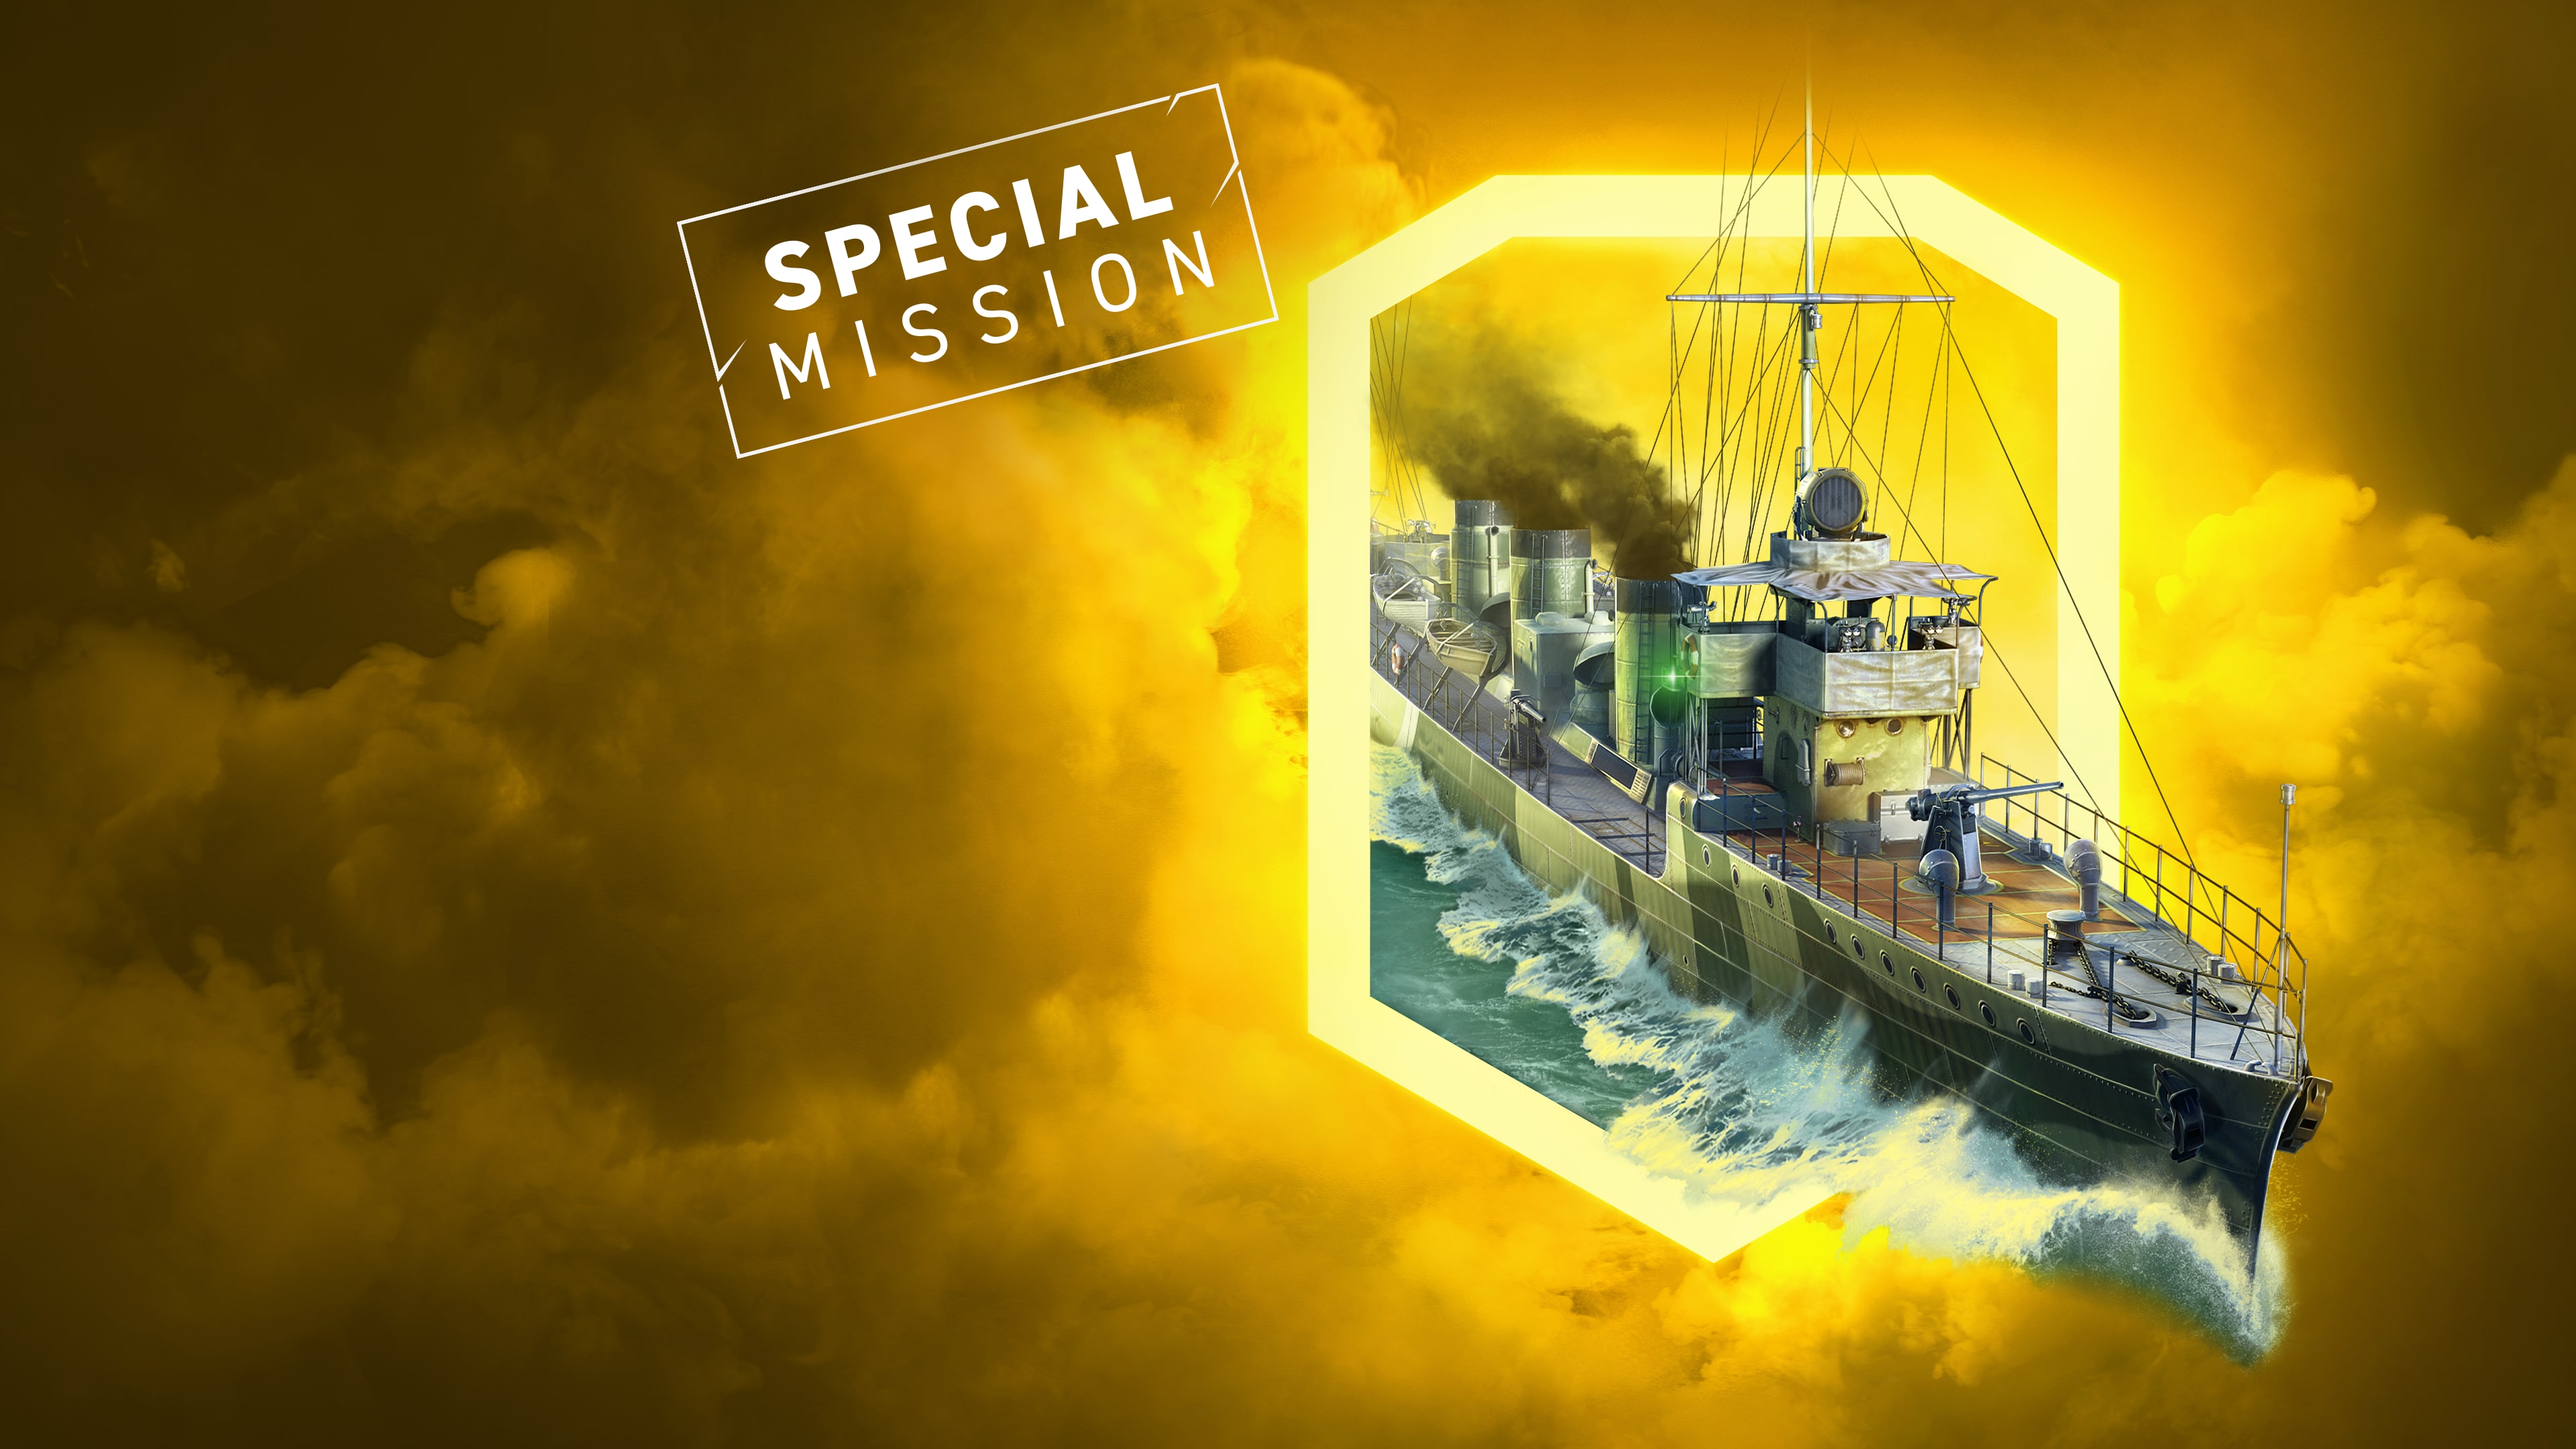 World of Warships: Legends - PS4™ Fateful Wind